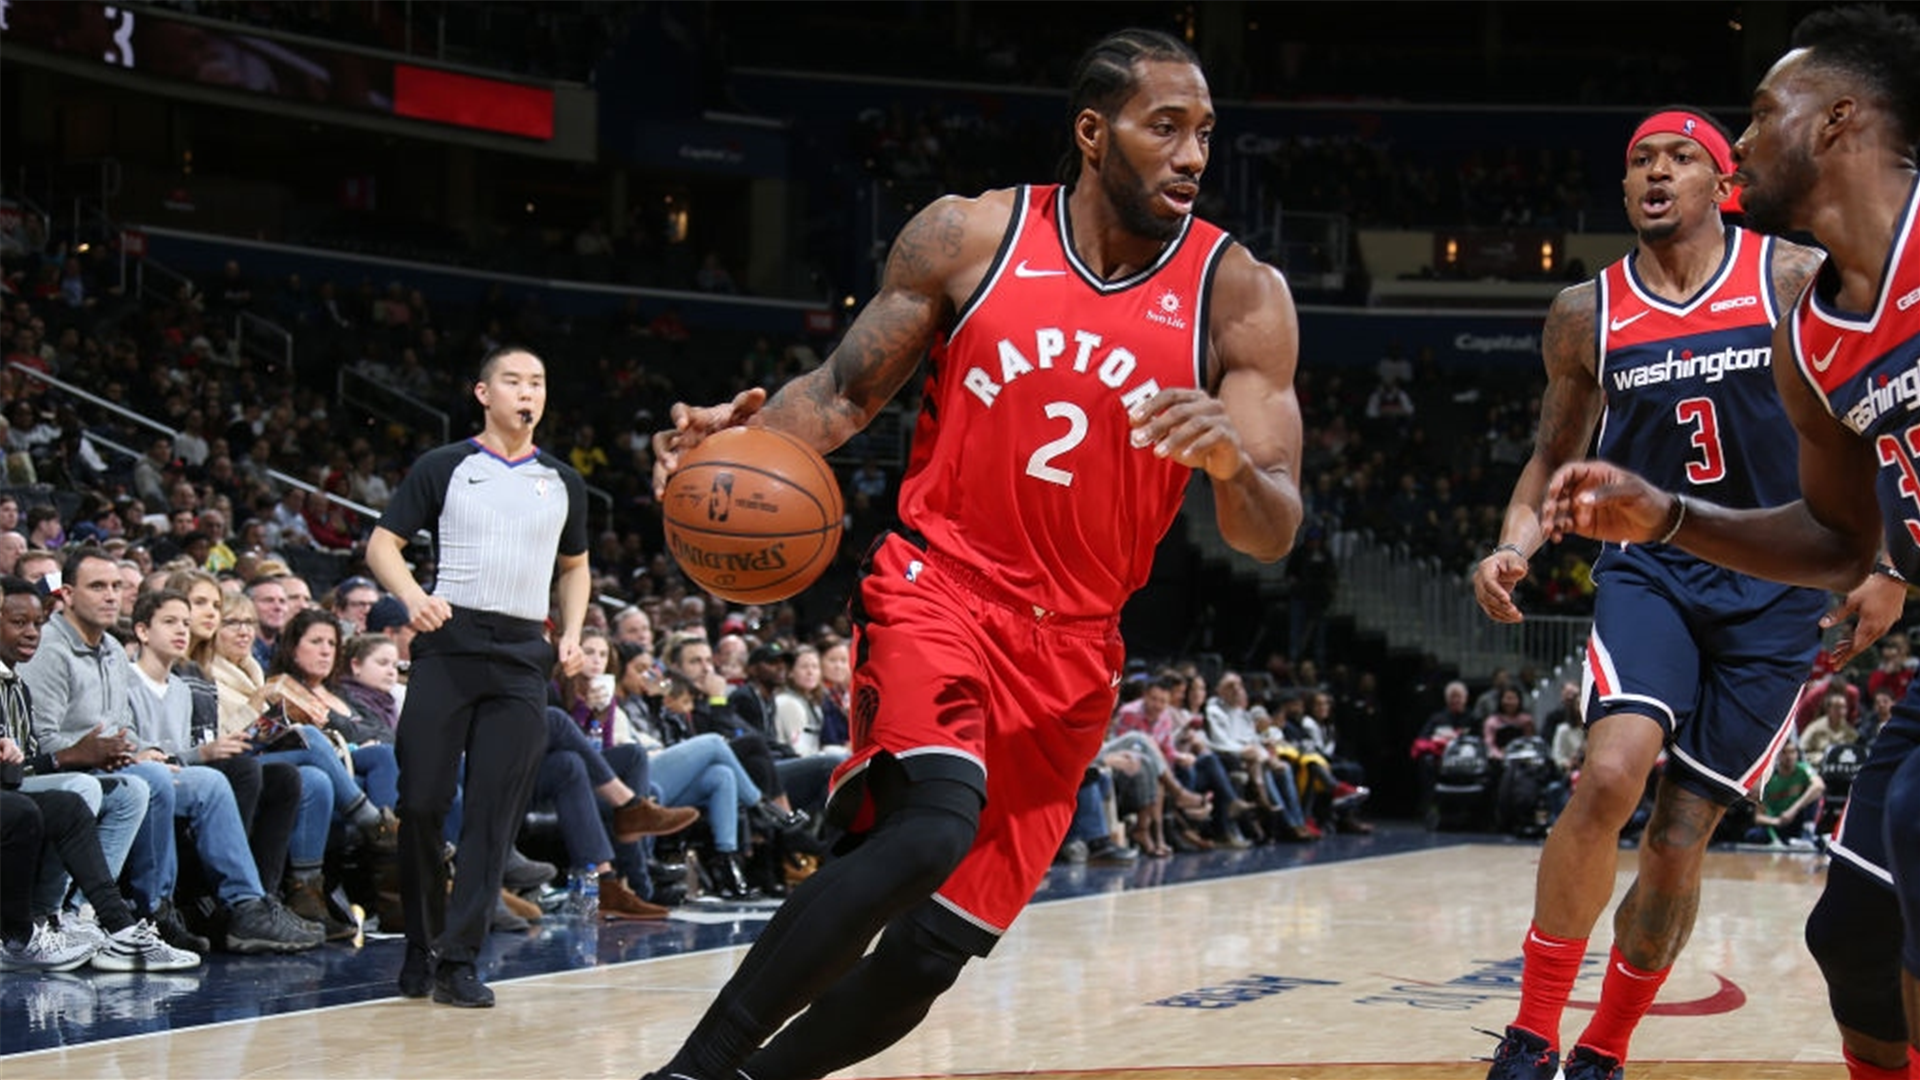 Kawhi Leonard's team-high 41 points leads the Raptors past the Washington Wizards in ...1920 x 1080